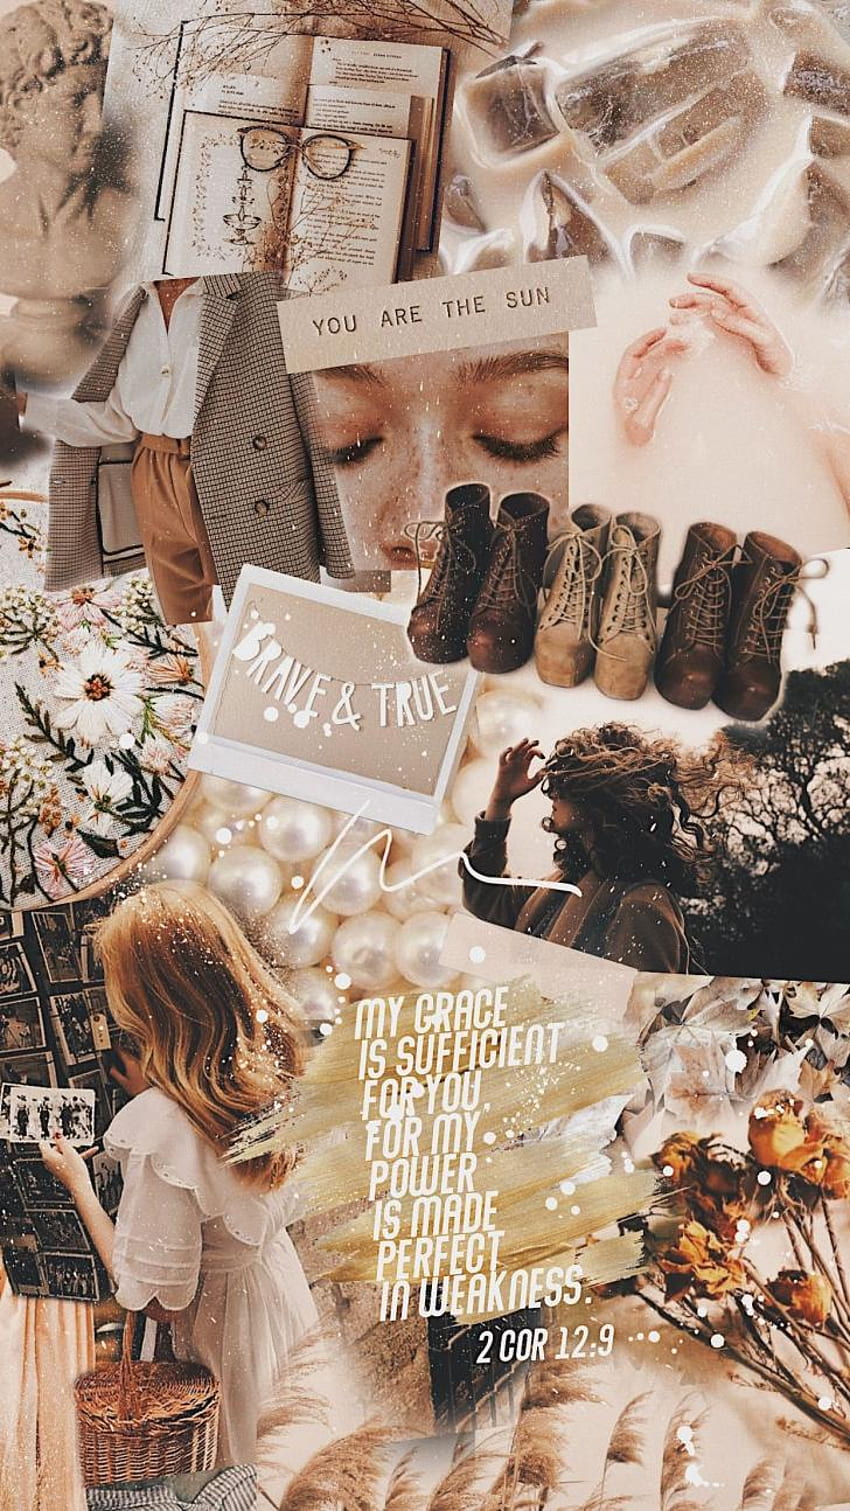 Aesthetic collage background for phone with a girl, books, flowers, boots, and a Bible verse. - Collage